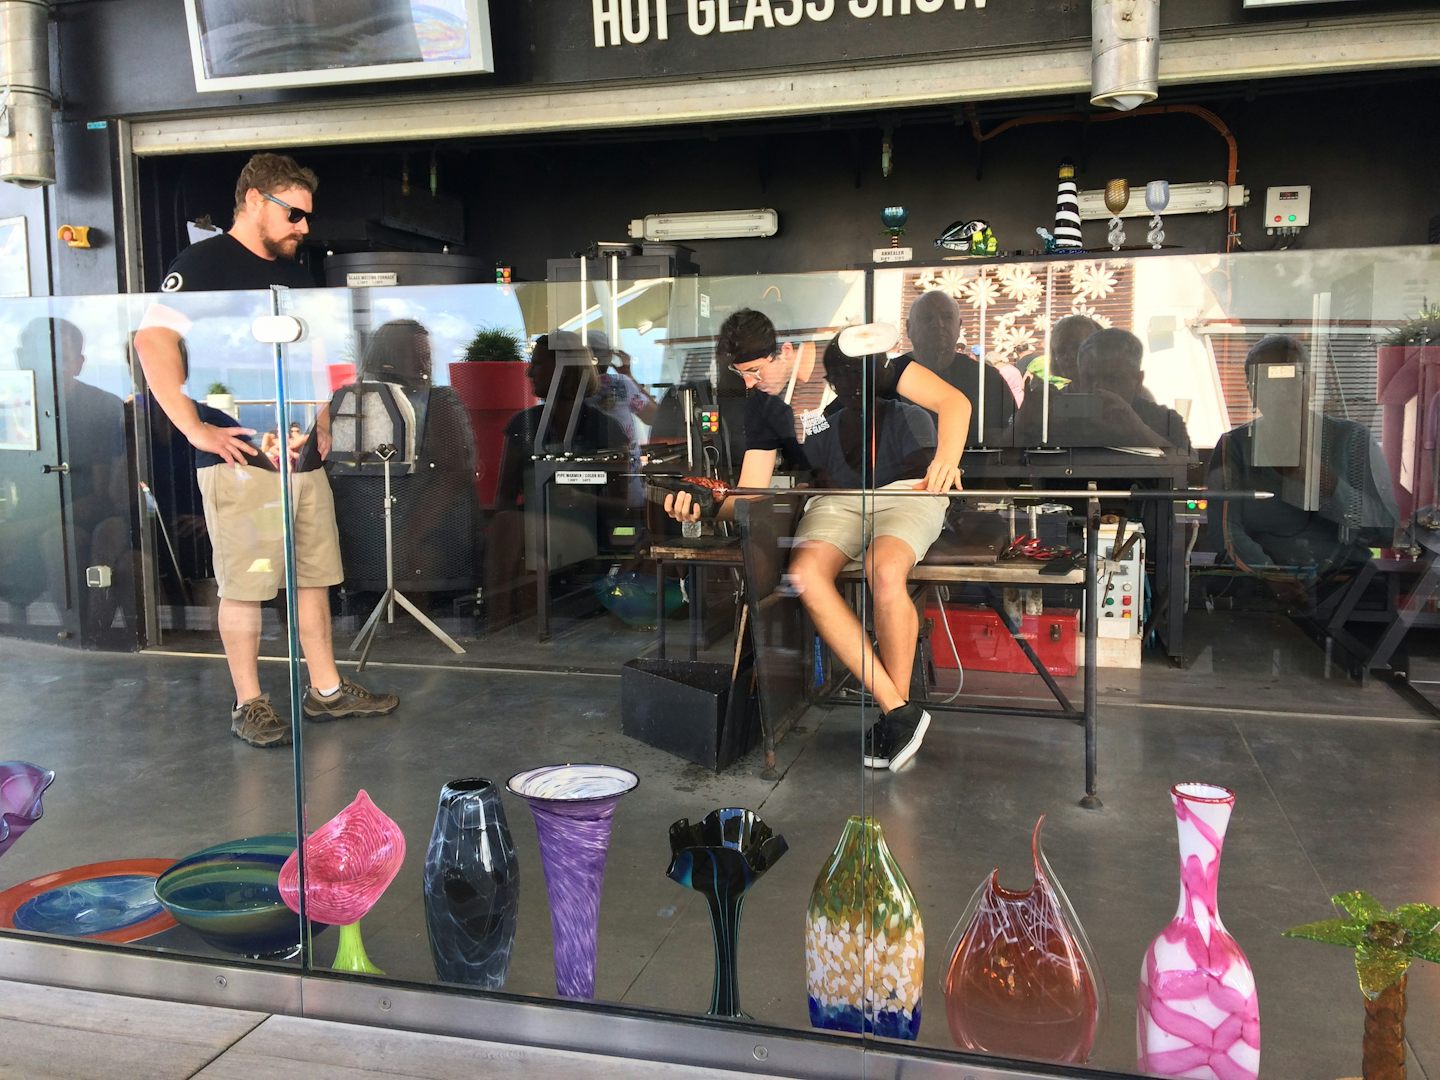 Glass Blowing show